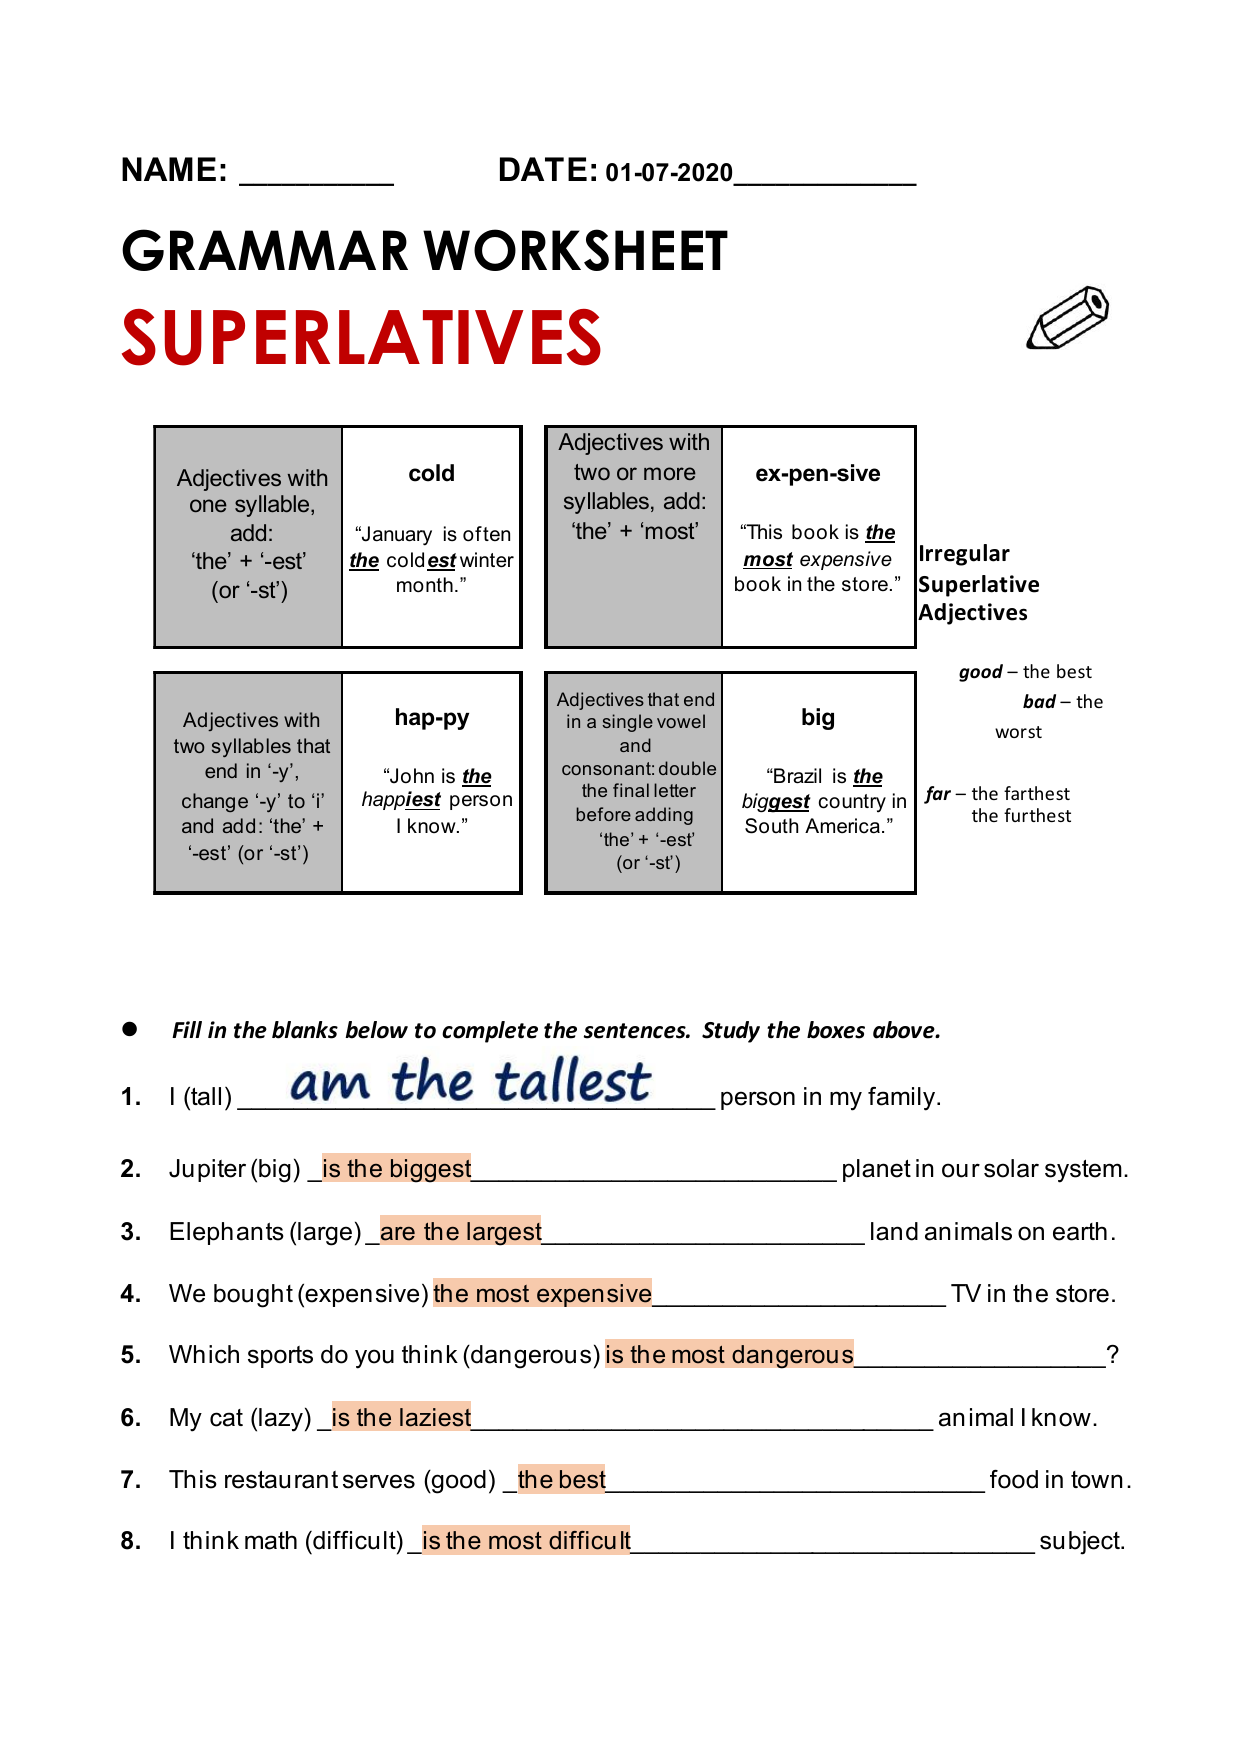 Comparatives Interactive Worksheet In 2020 Superlative Adjectives Images